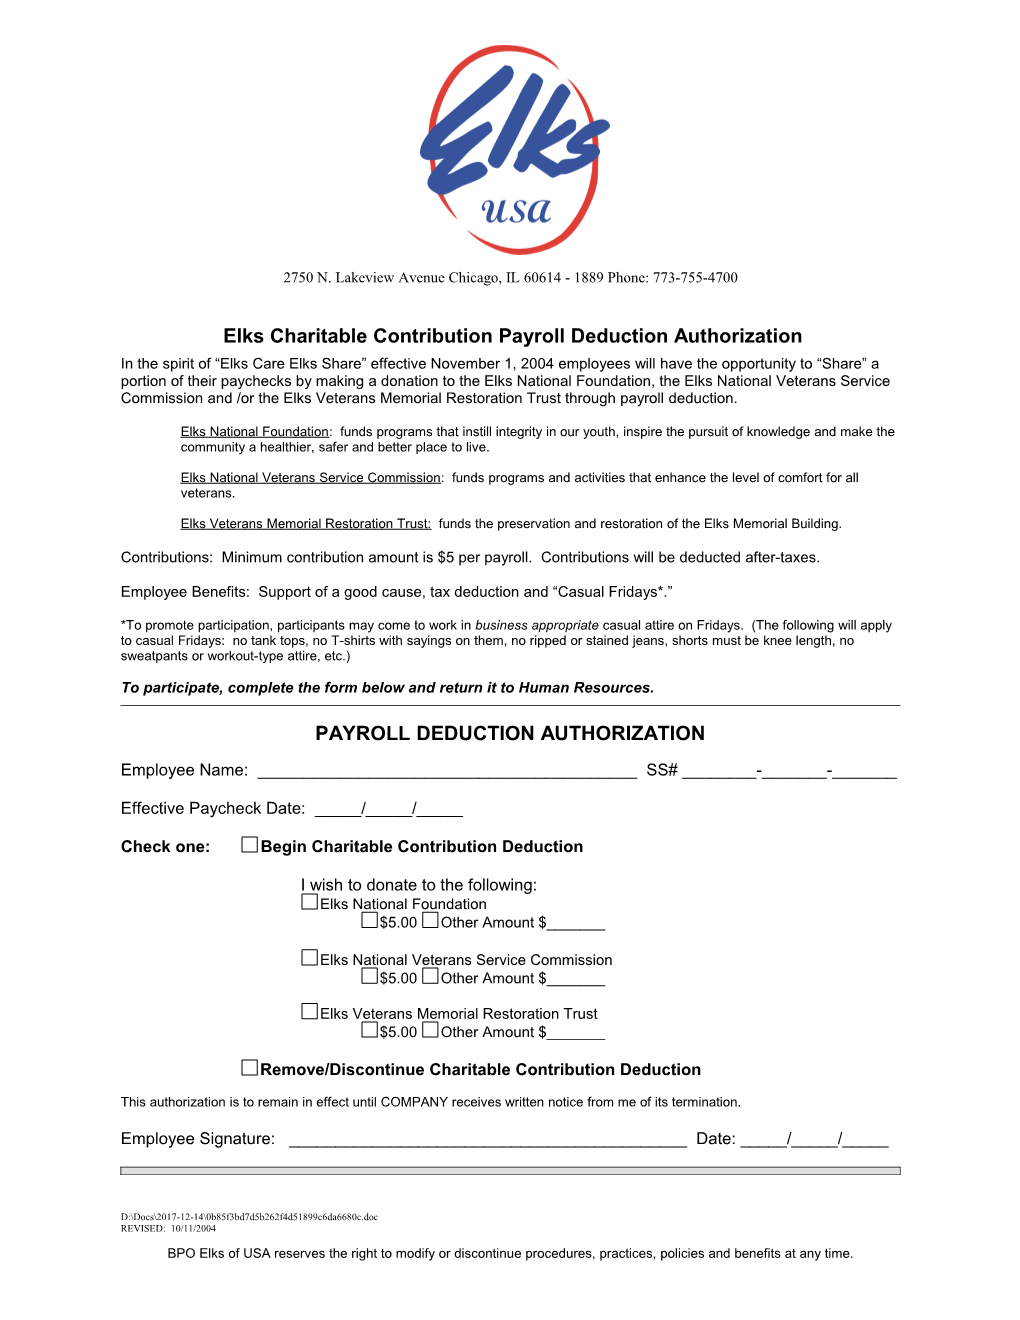 Elks Charitable Contribution Payroll Deduction Authorization